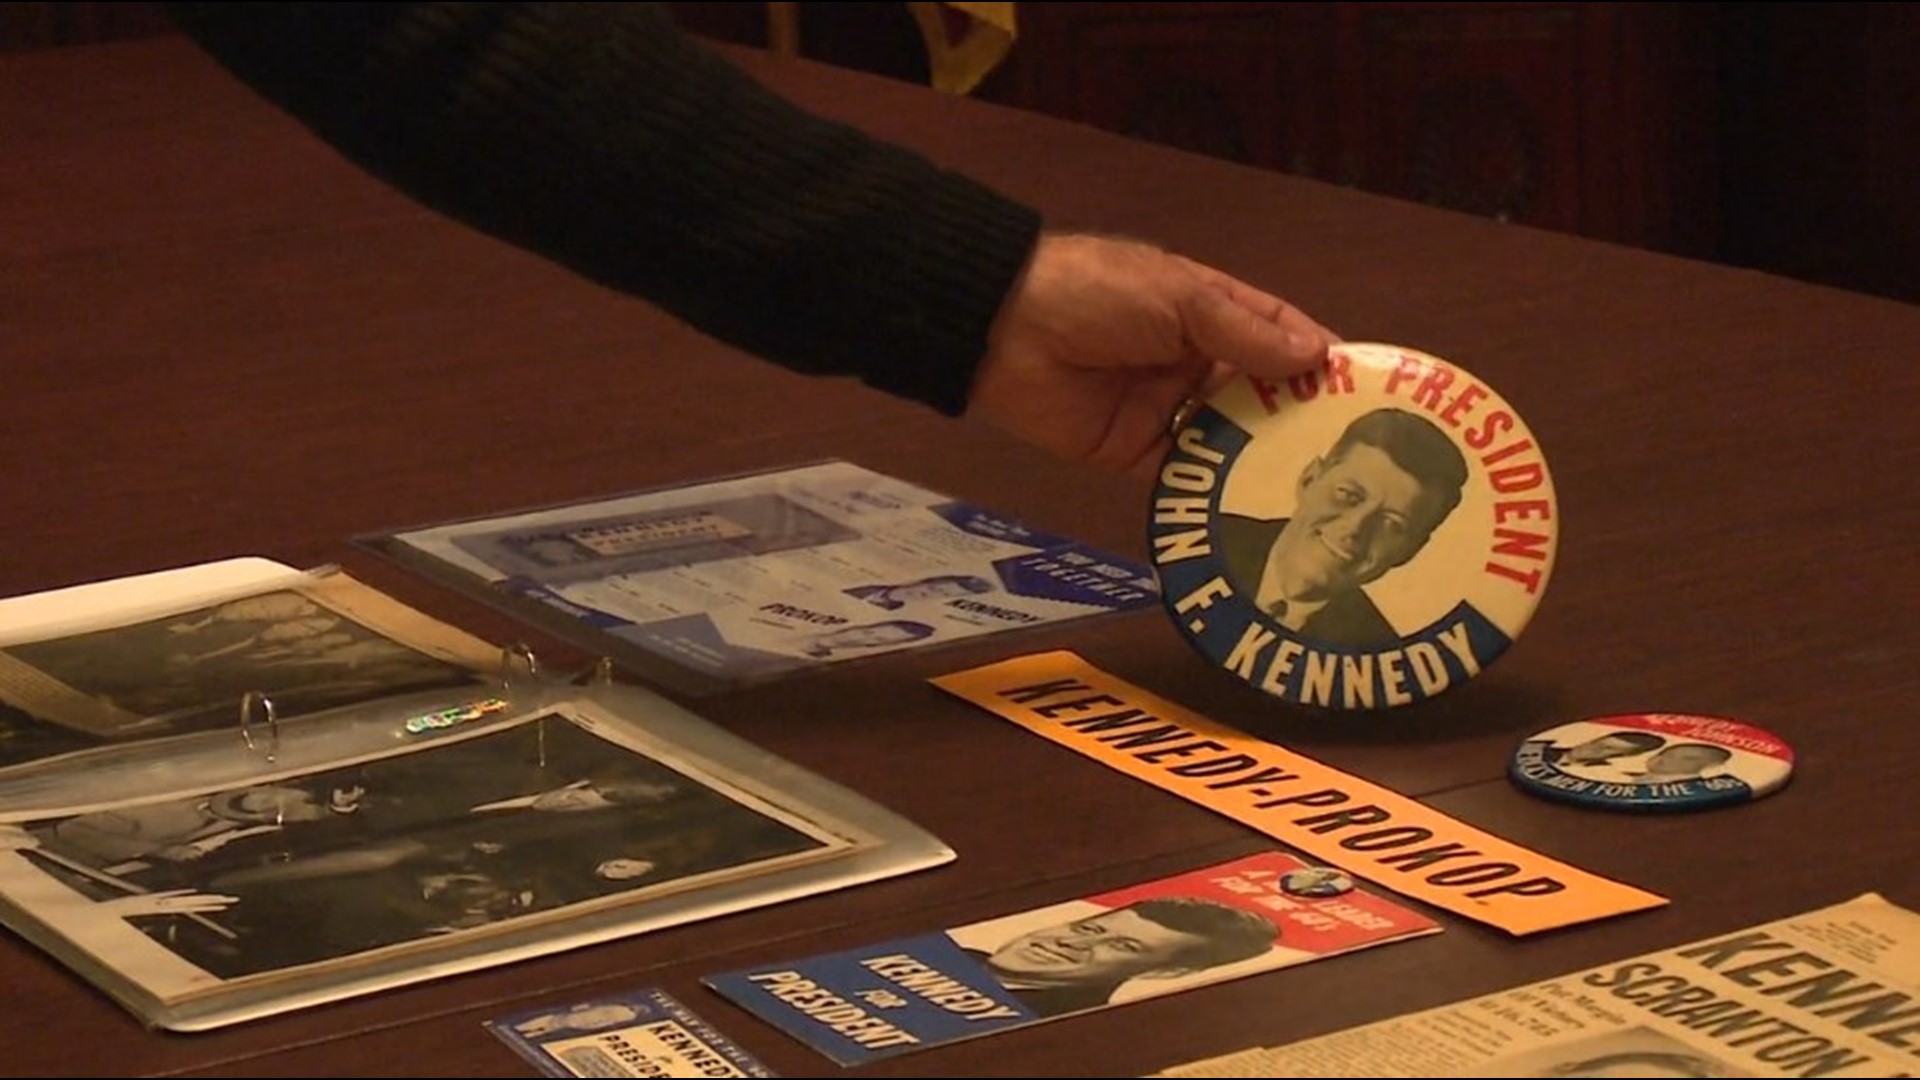 JFK made a campaign swing through a number of northeastern Pennsylvania communities.